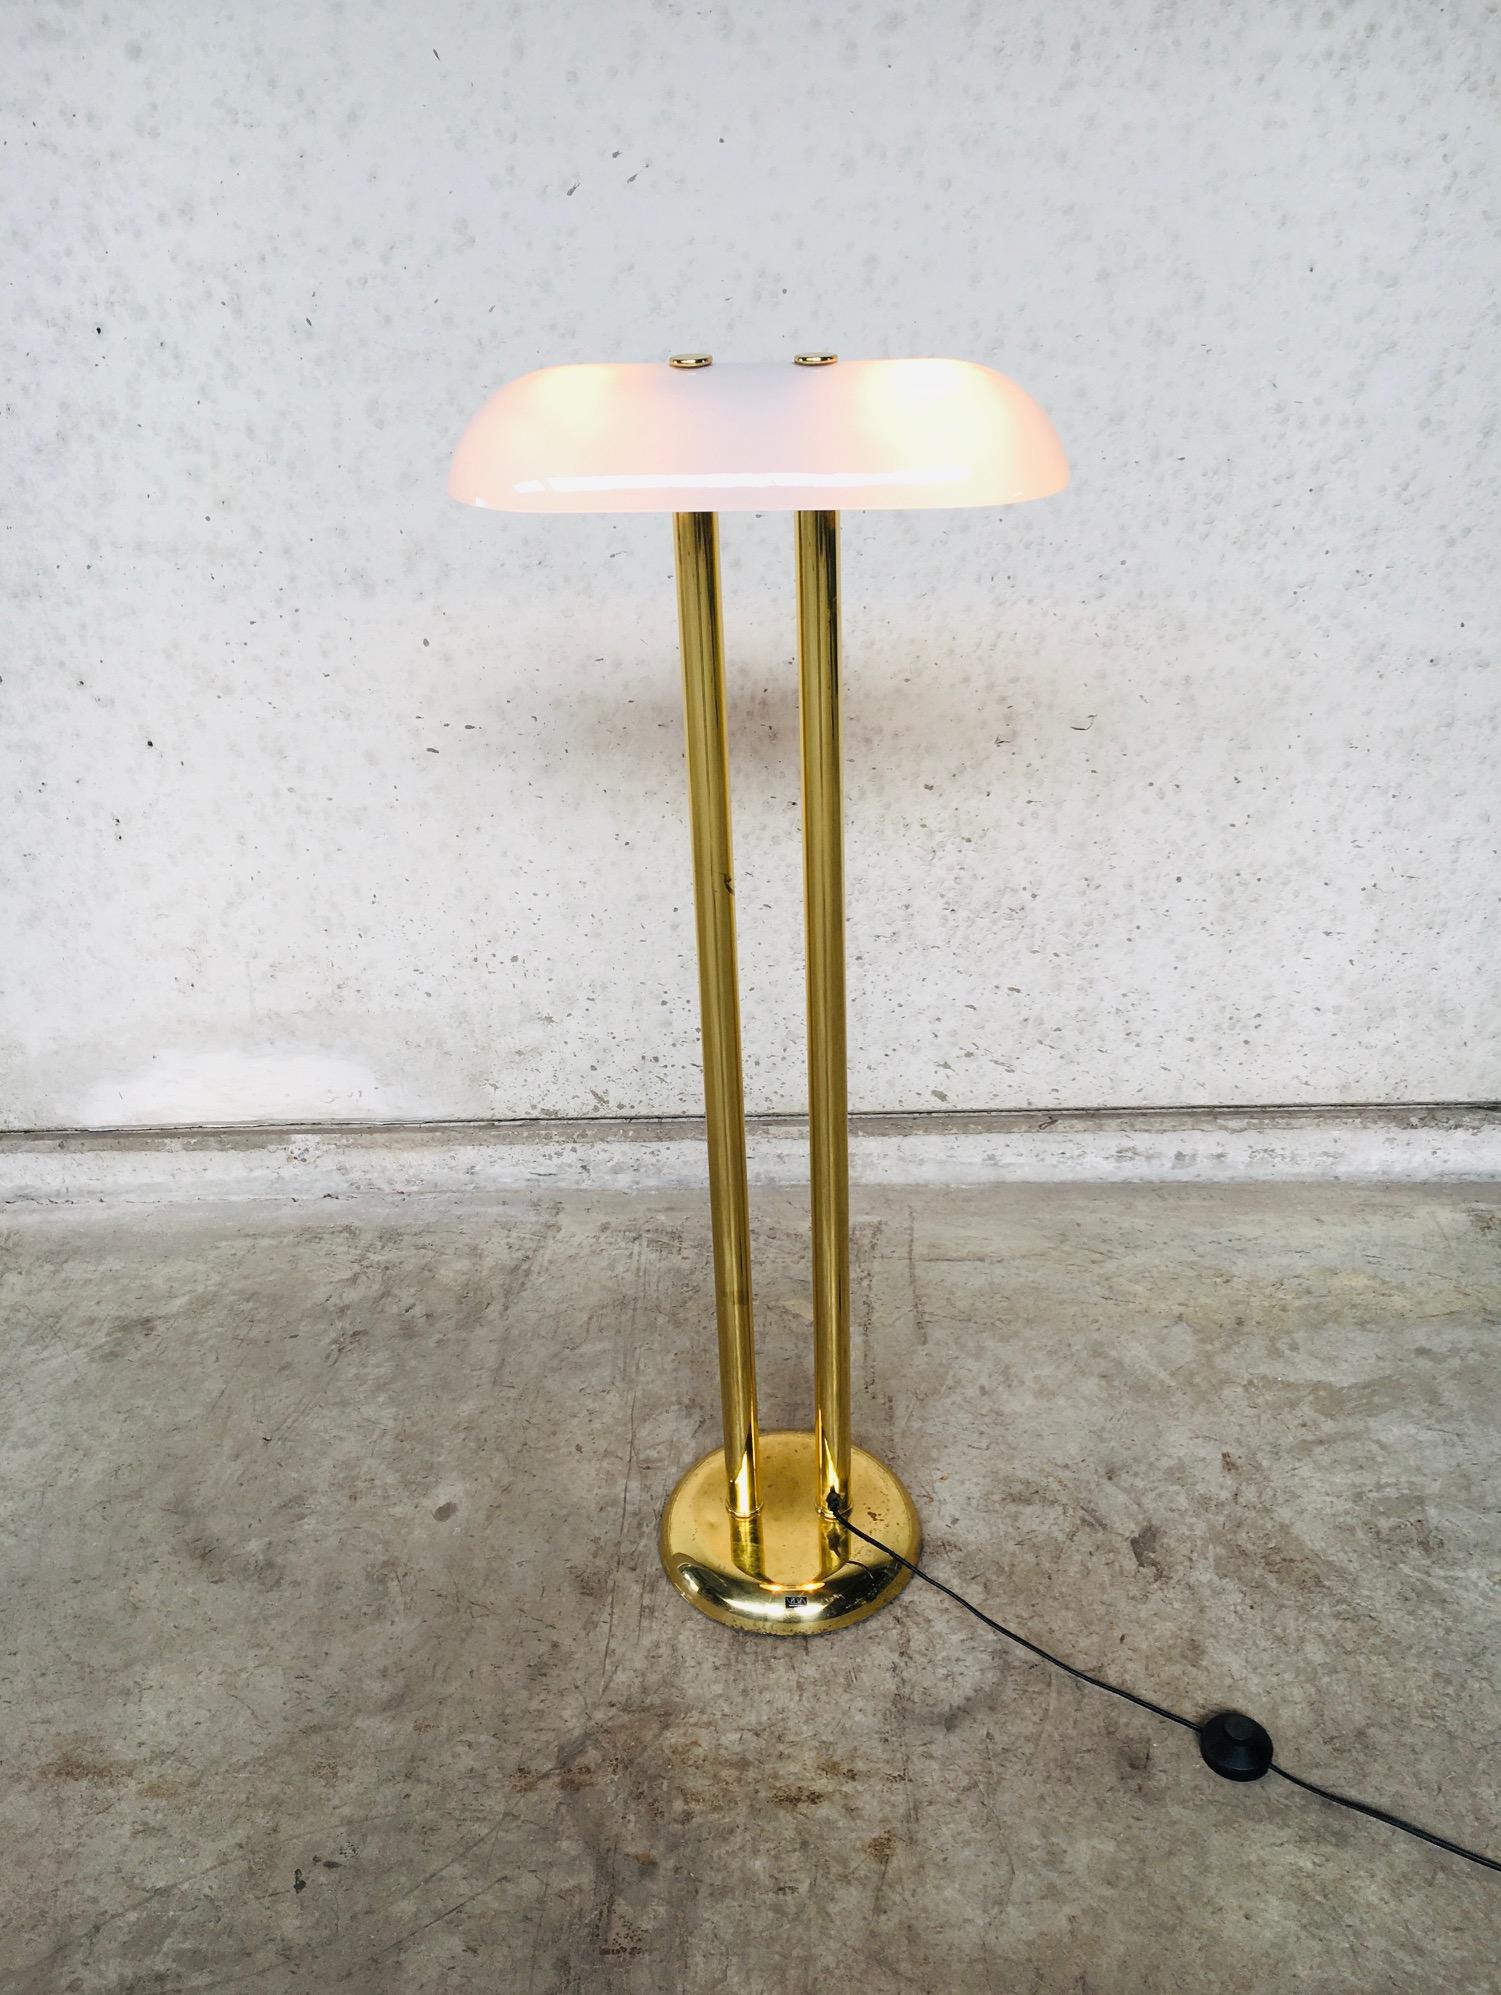 Vintage Hollywood Regency Style Midcentury Modern Design Brass Floor Lamp by Vibia, made in Spain in the 1970's. Marked with a label sticker on the base. Brass twin colom base with white milk glass shade. All original and in good condition. The